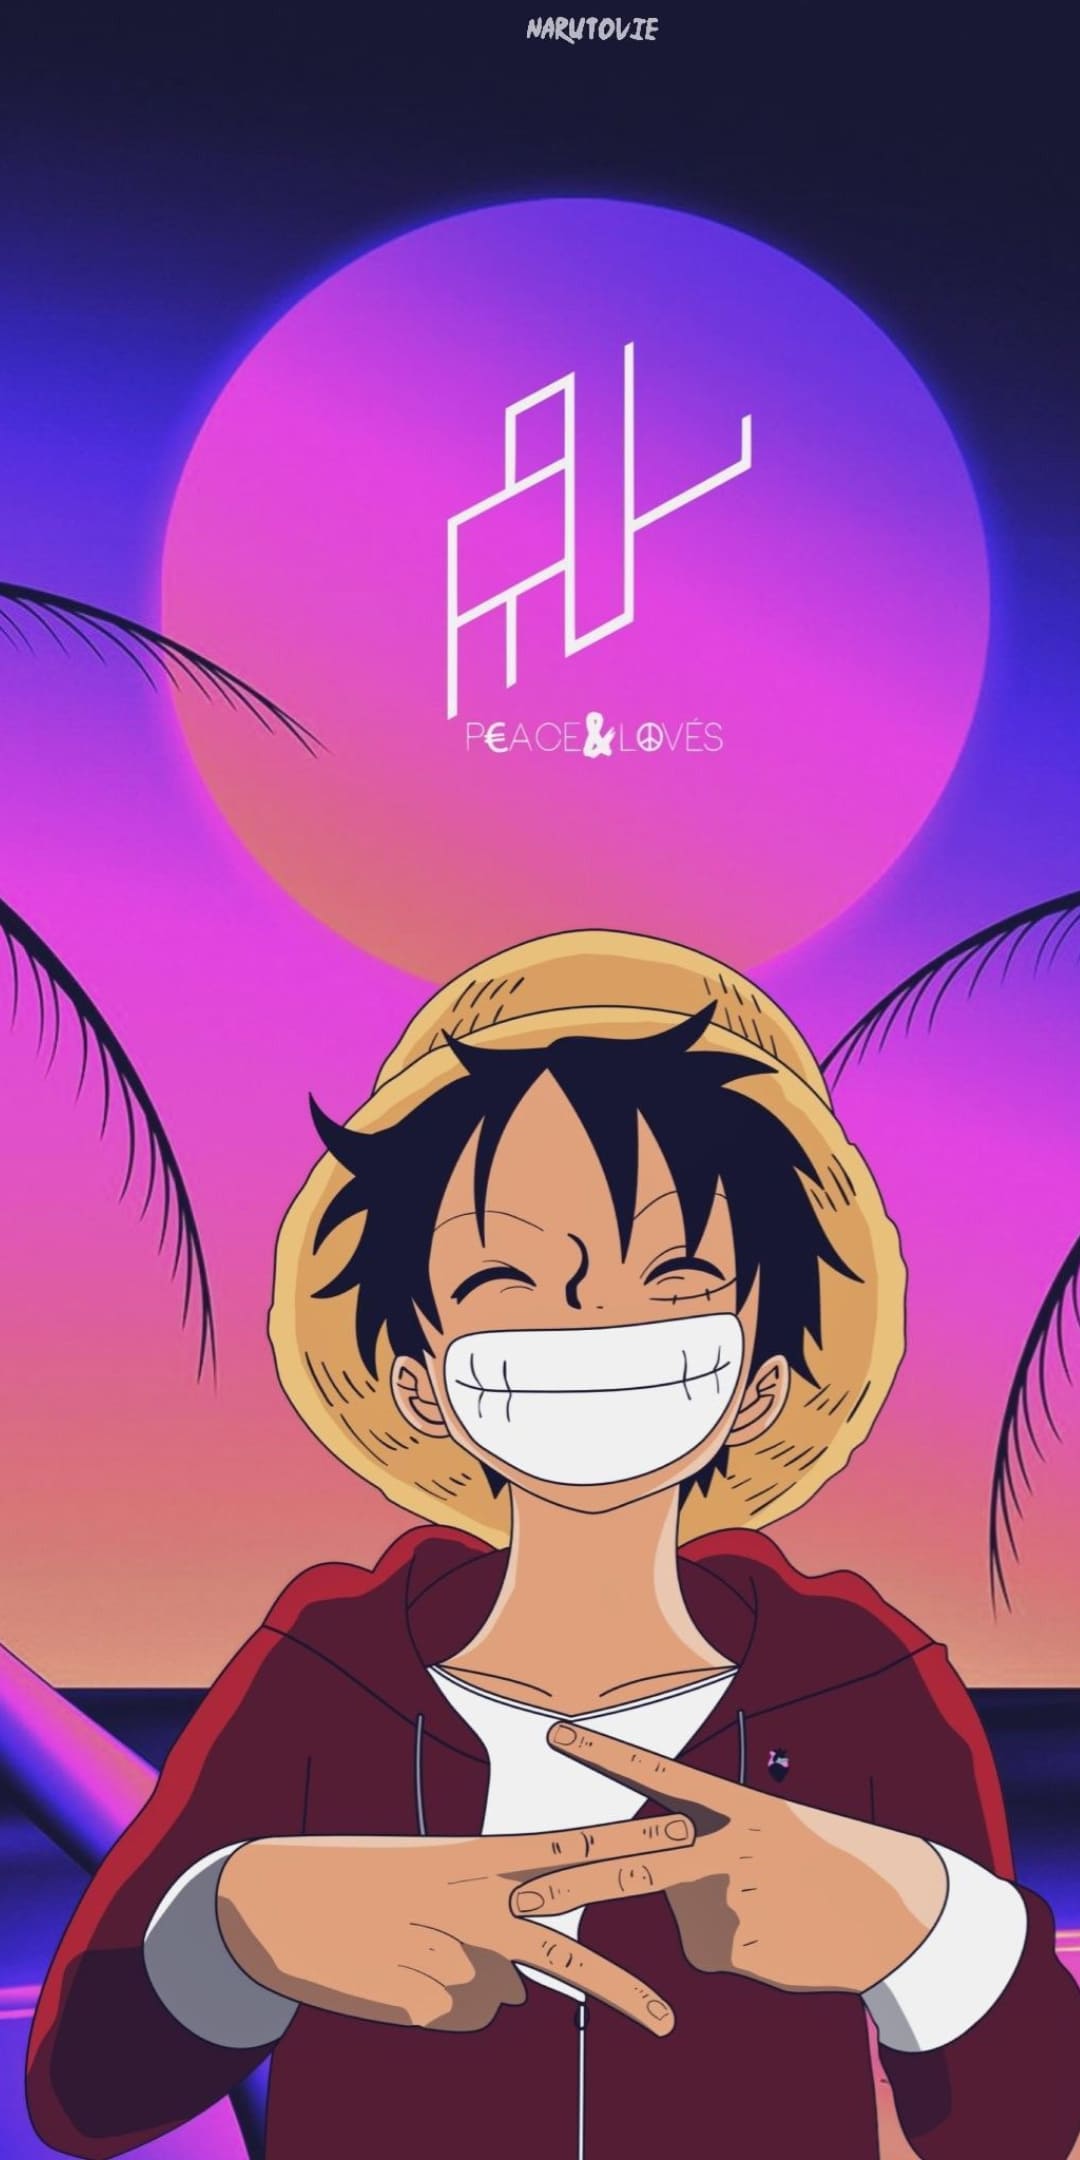 Monkey D Luffy Wallpaper edit by me Hope you guys like it  rOnePiece